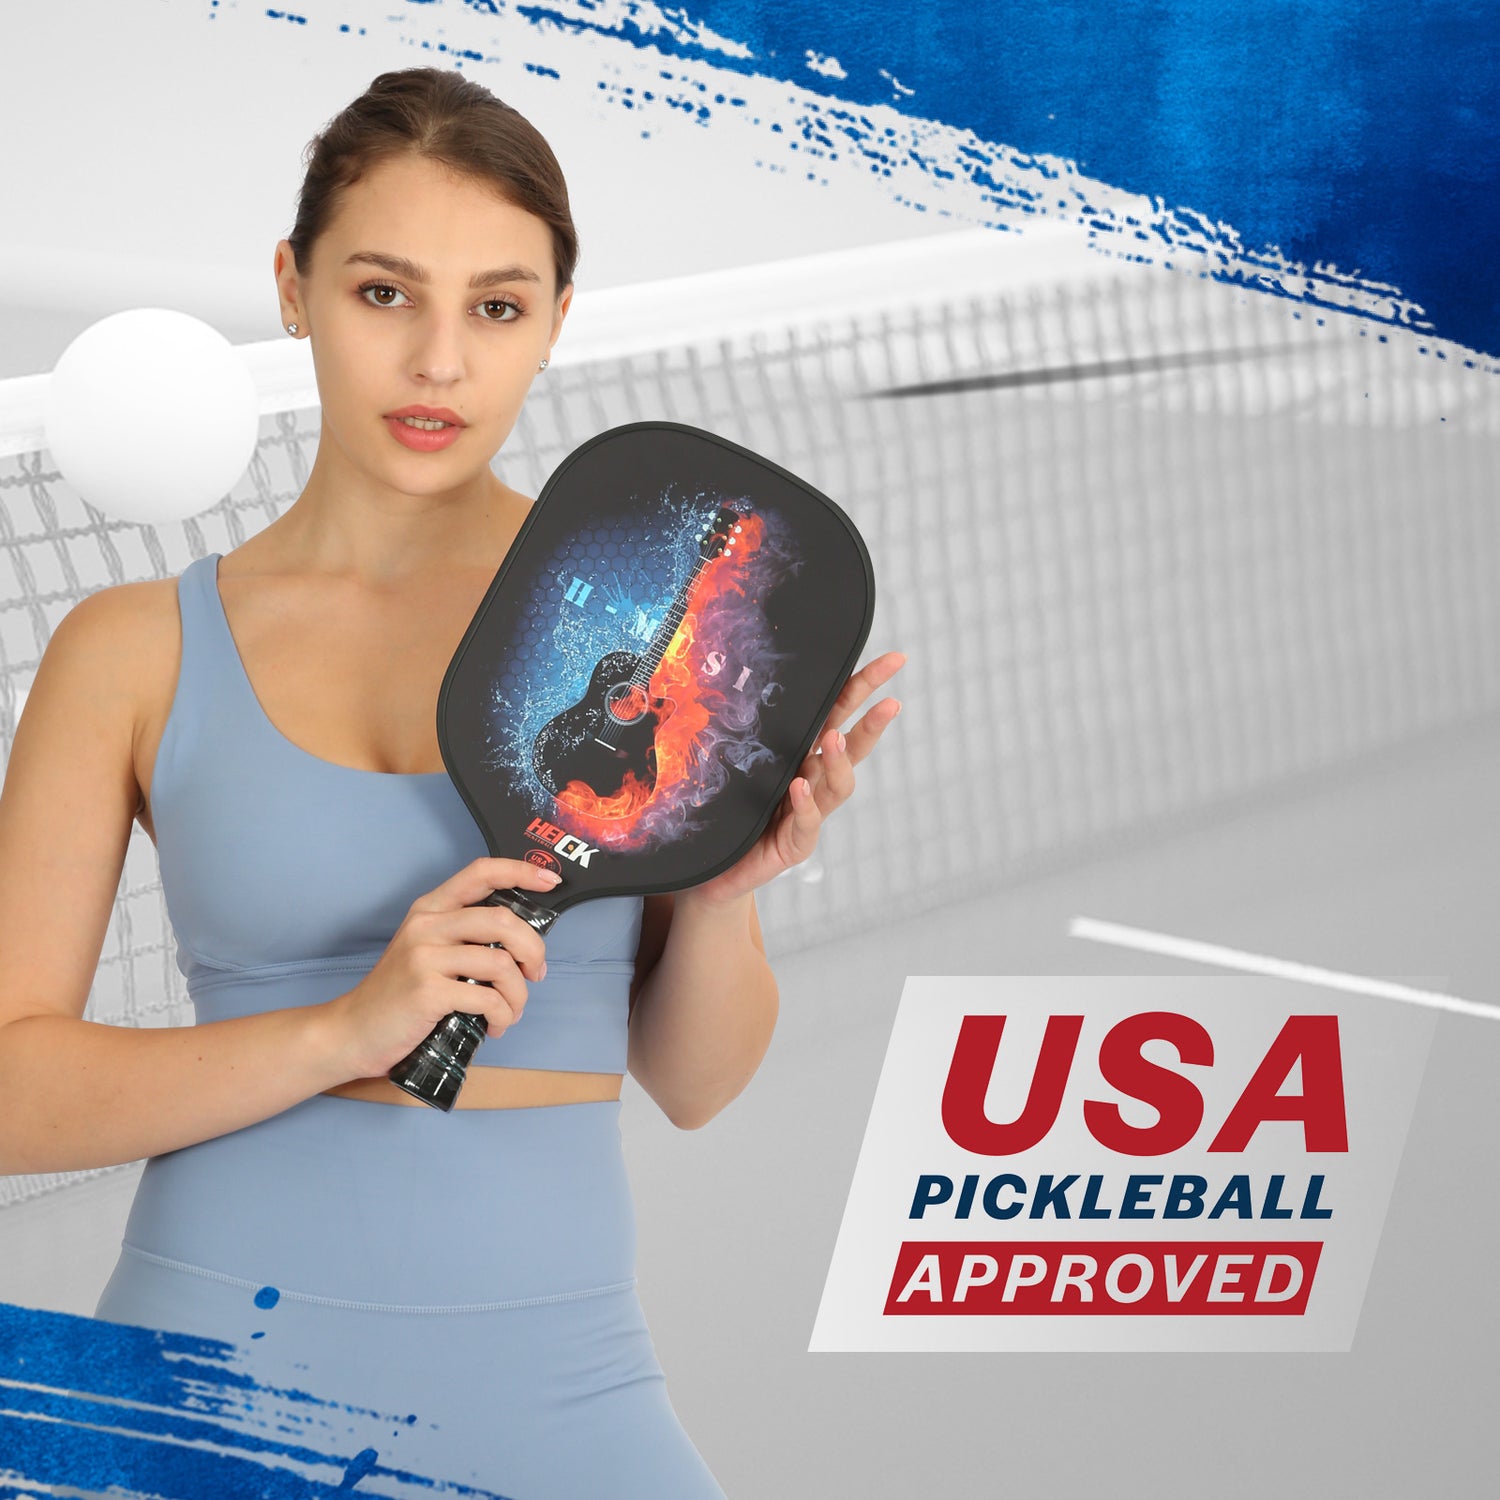 HEICK H-musicG2 Pickleball Paddle
【USA Pickleball Approved】Certified by USA Pickleball to meet their requirements for tournament play. USA Pickleball graphic on the face of the pickleball paddle so Heick Pickleball